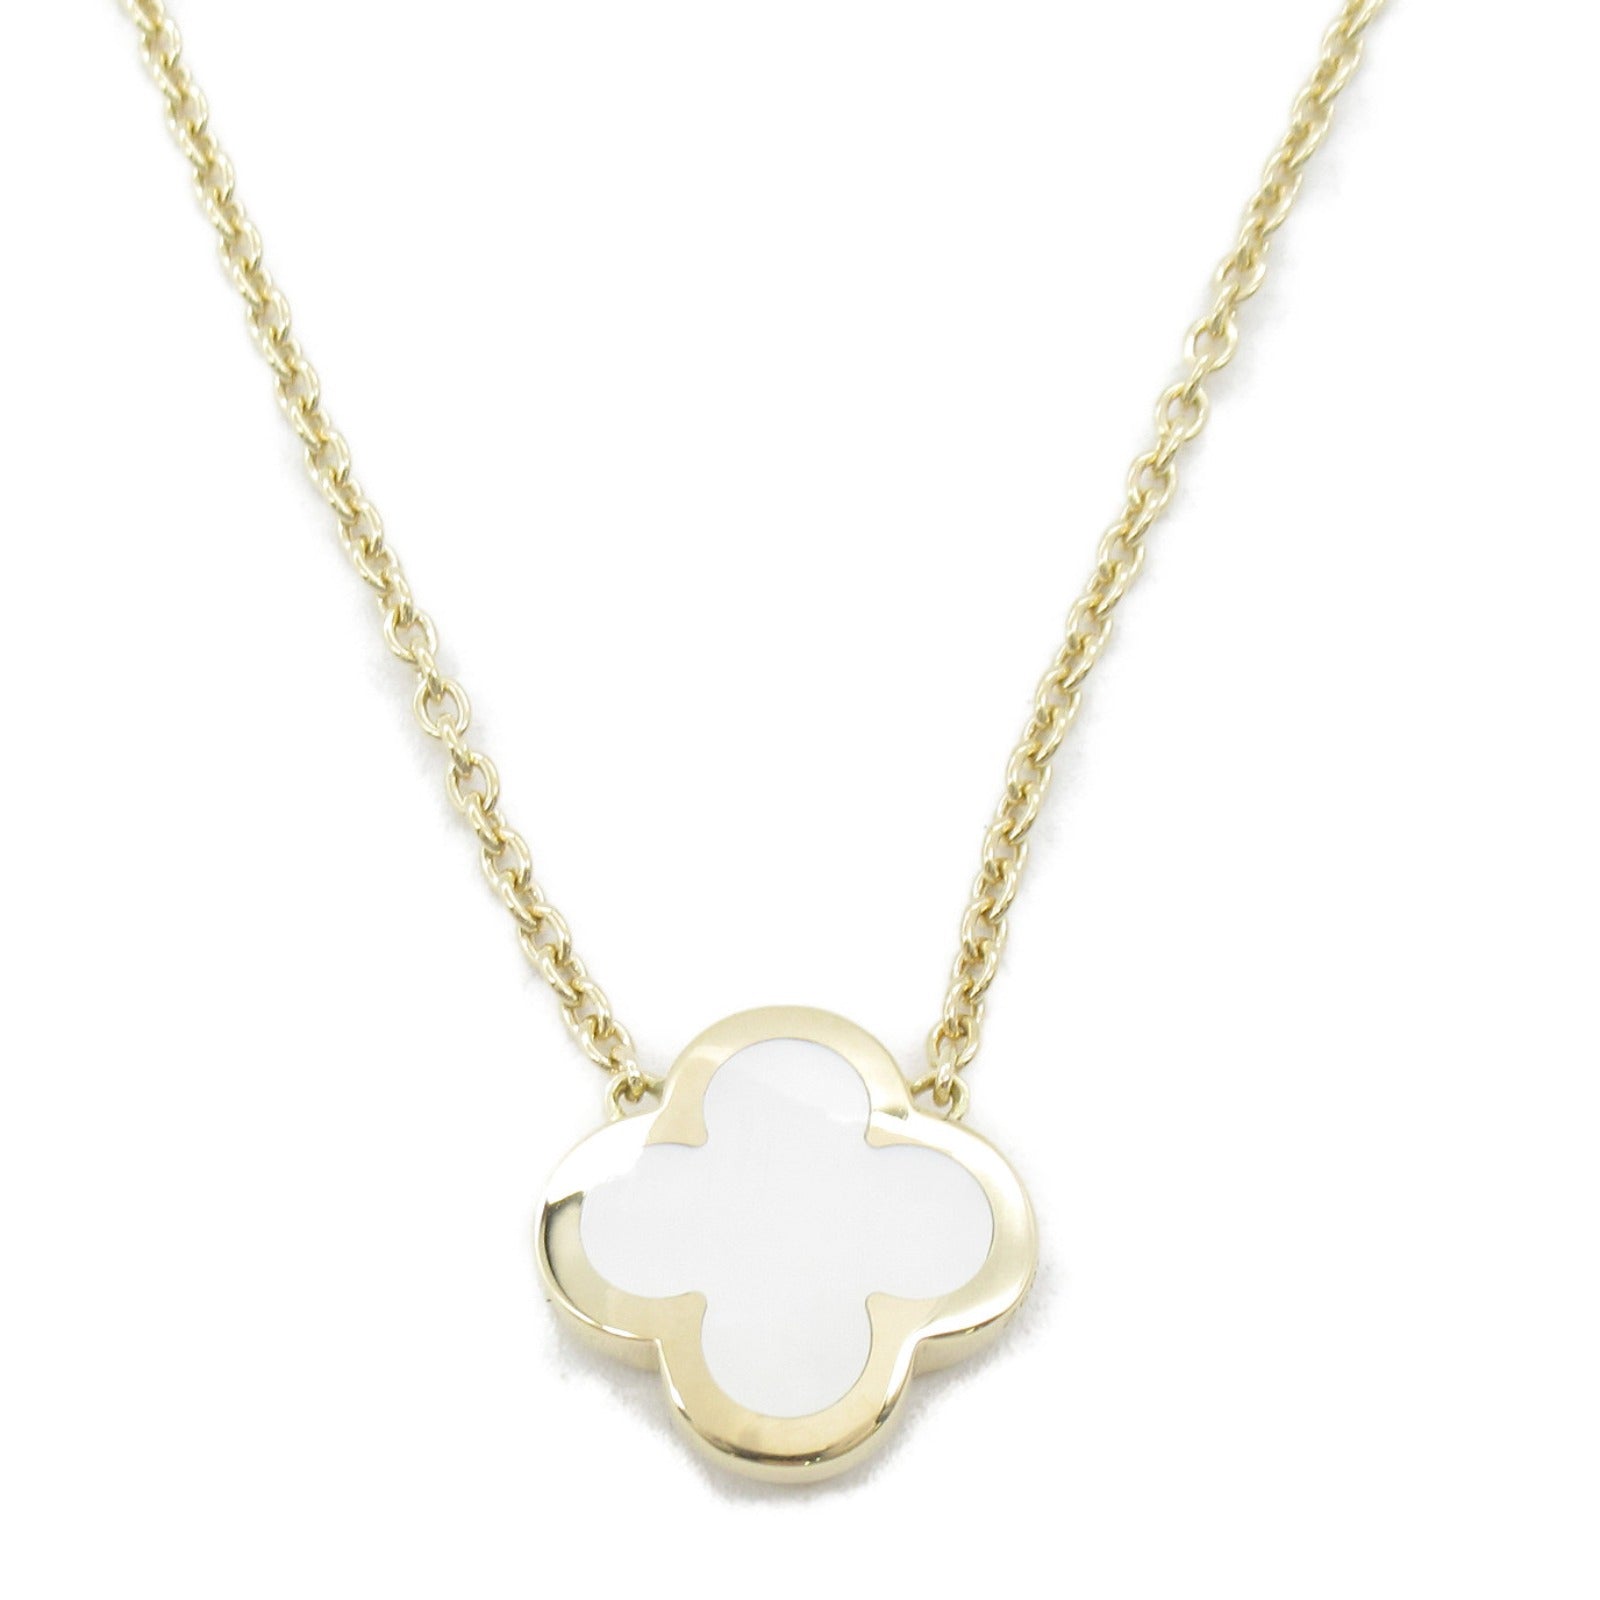 Van Cleef &amp; Arpels Van Cleef &amp; Arpels Alhambra White S Pendant Necklace Jewelry K18 (yellow g) White Shell  White Shell